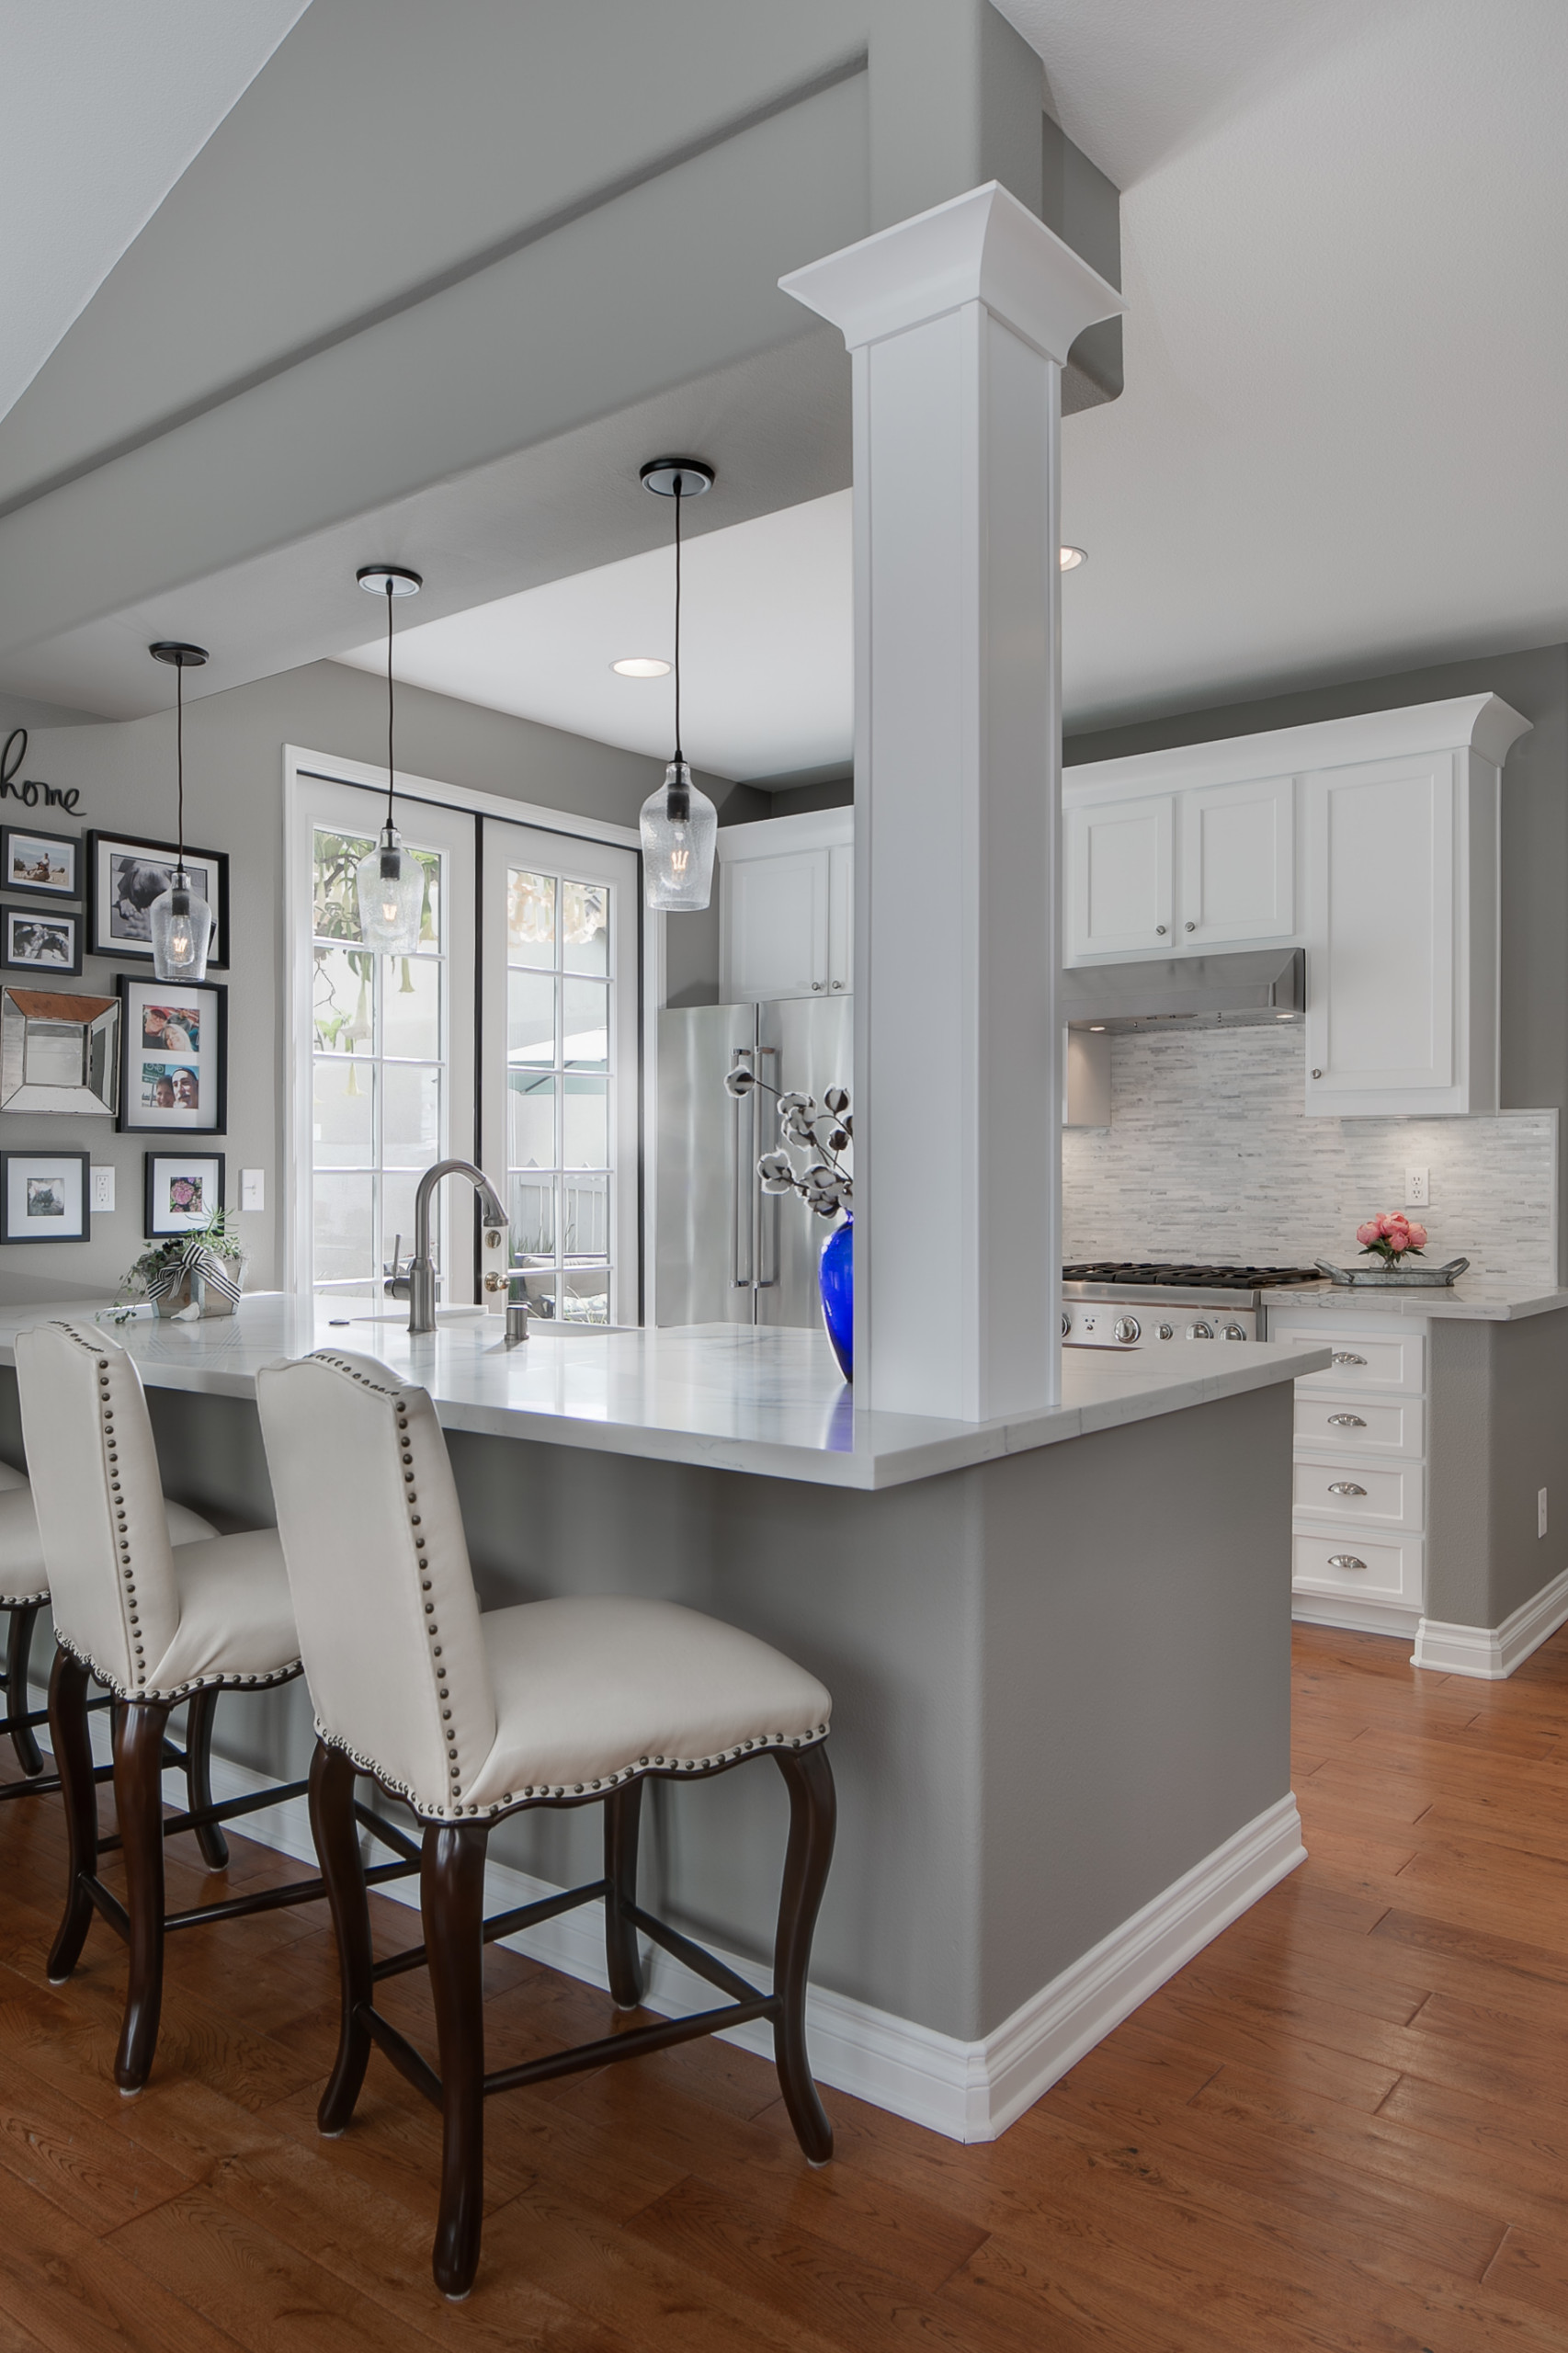 18 Small Galley Kitchen Ideas You'll Love   August, 18   Houzz